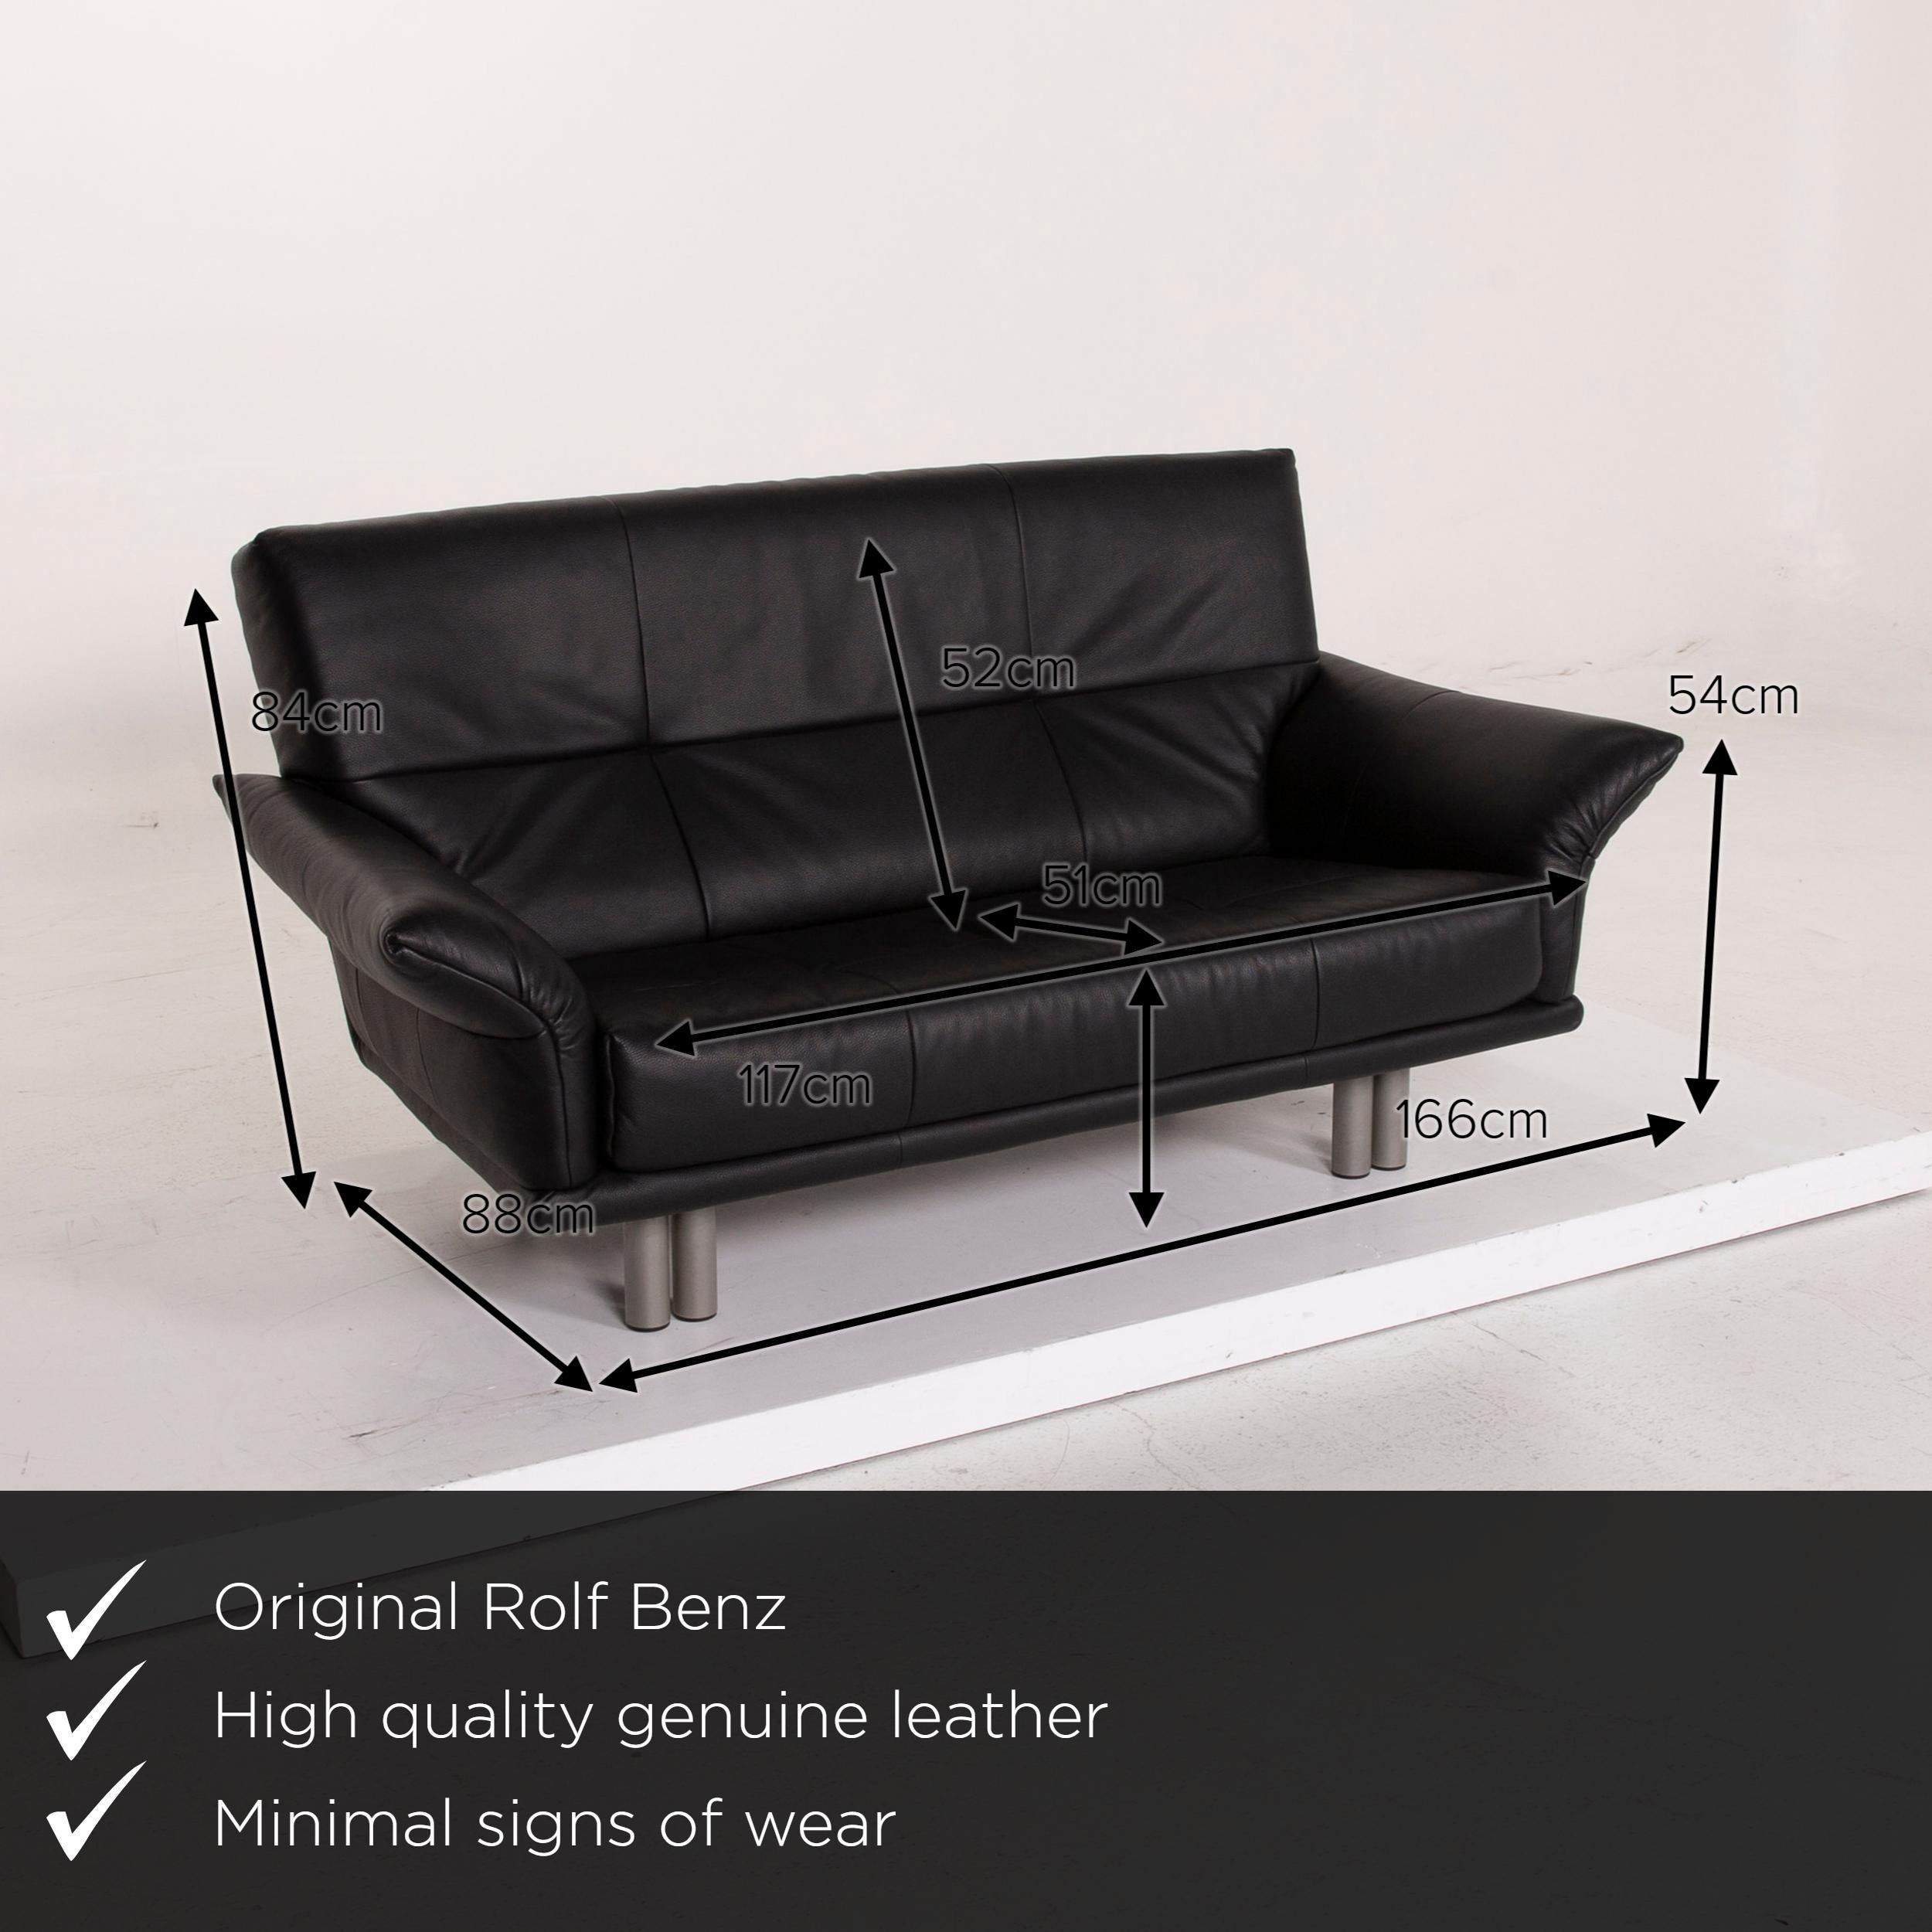 We present to you a Rolf Benz leather sofa black two-seat.

 

 Product measurements in centimetres:
 

 depth: 88
 width: 166
 height: 84
 seat height: 41
 rest height: 54
 seat depth: 51
 seat width: 117
 back height: 52.